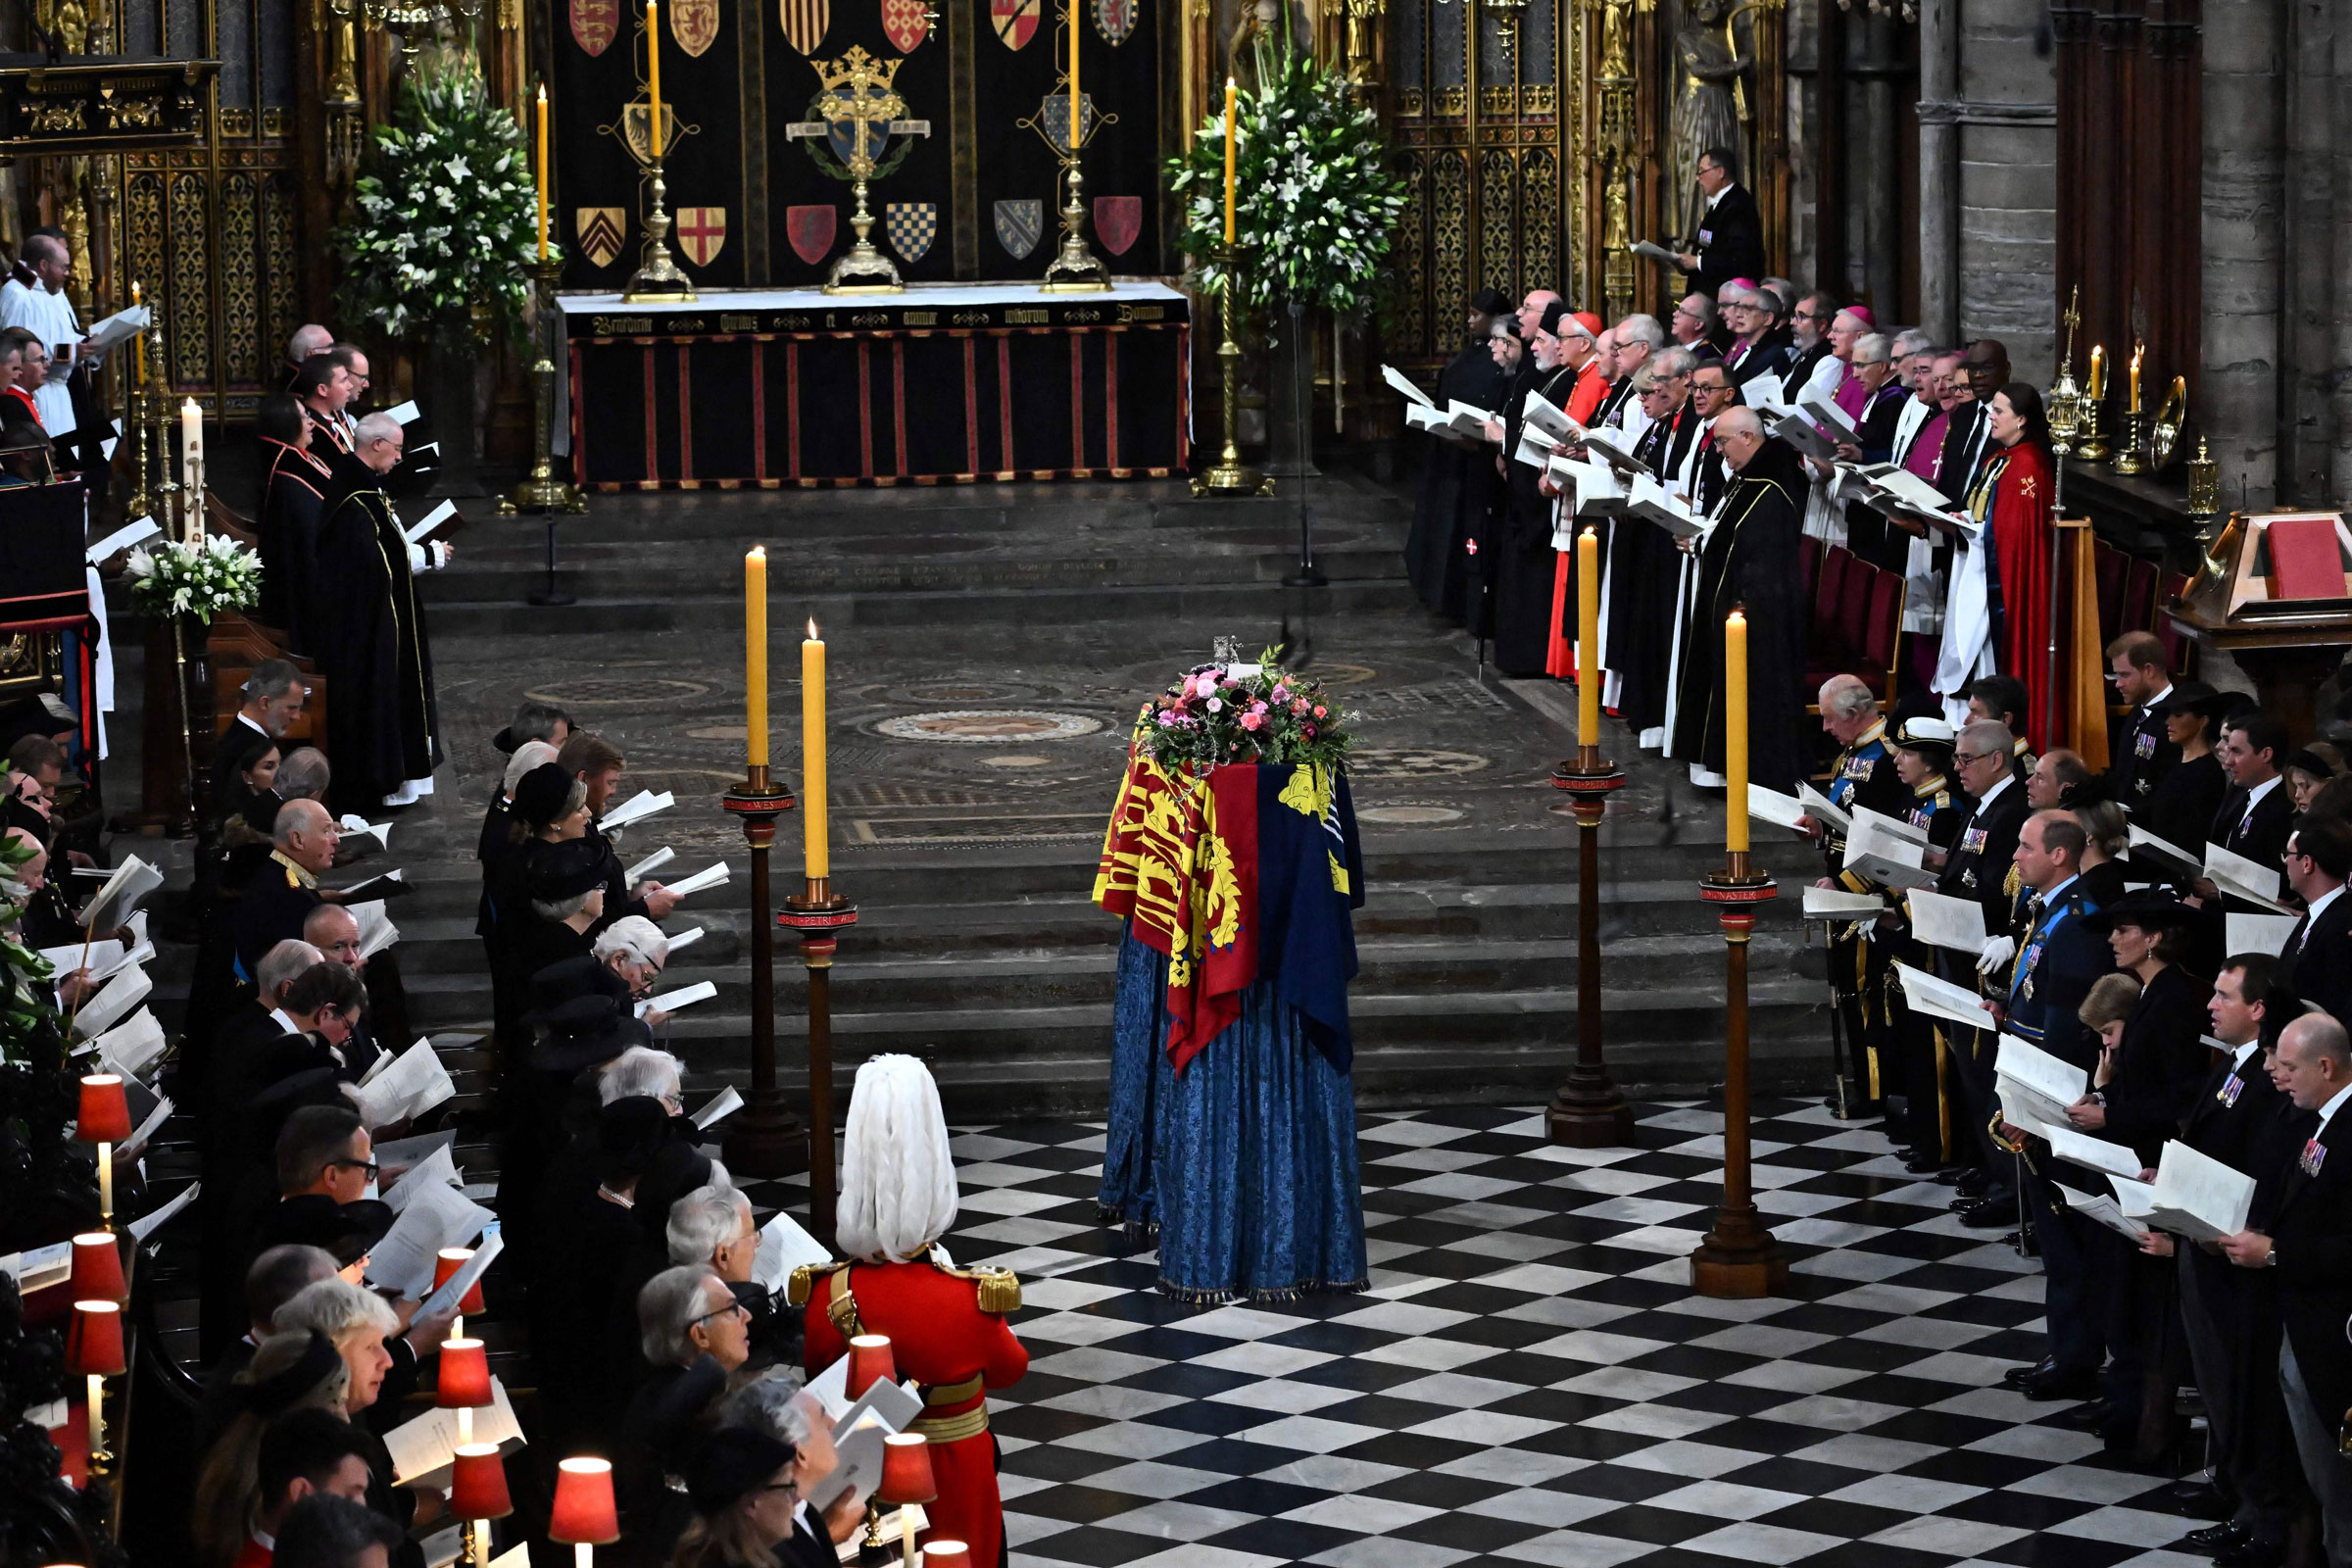 Members of the royal family and guests sing as the coffin of Queen Elizabeth II, draped in the royal standard, lies by the altar during the state funeral service for Queen Elizabeth II at Westminster Abbey in London. (Ben Stansall—Pool/AFP/Getty Images)